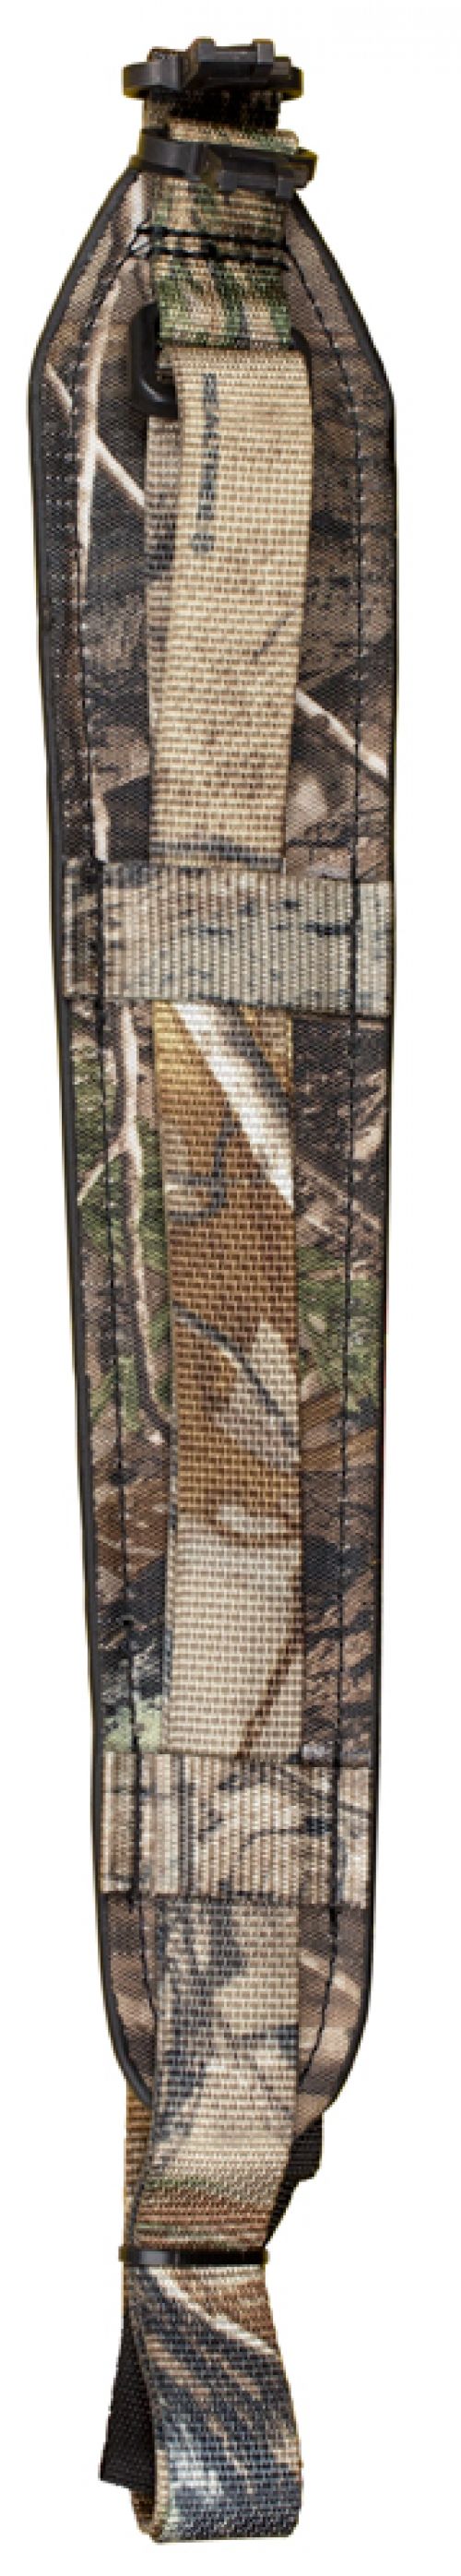 Outdoor Connection AD20927 Padded Super-Sling Quick Detach Swivel Realtree AP